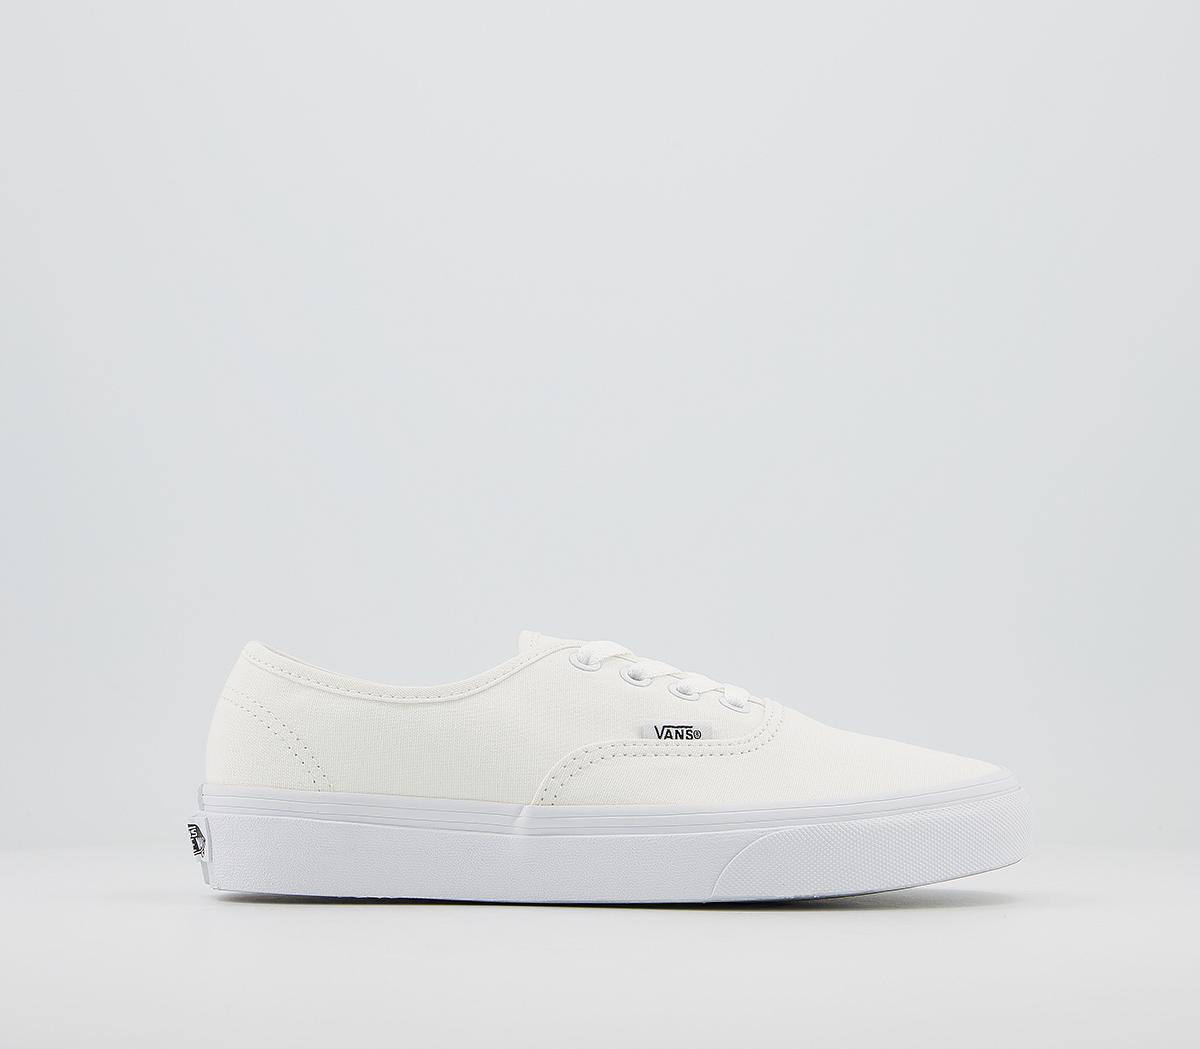 Forudsætning hjerne Billy ged Vans Authentic Trainers True White - Unisex Sports